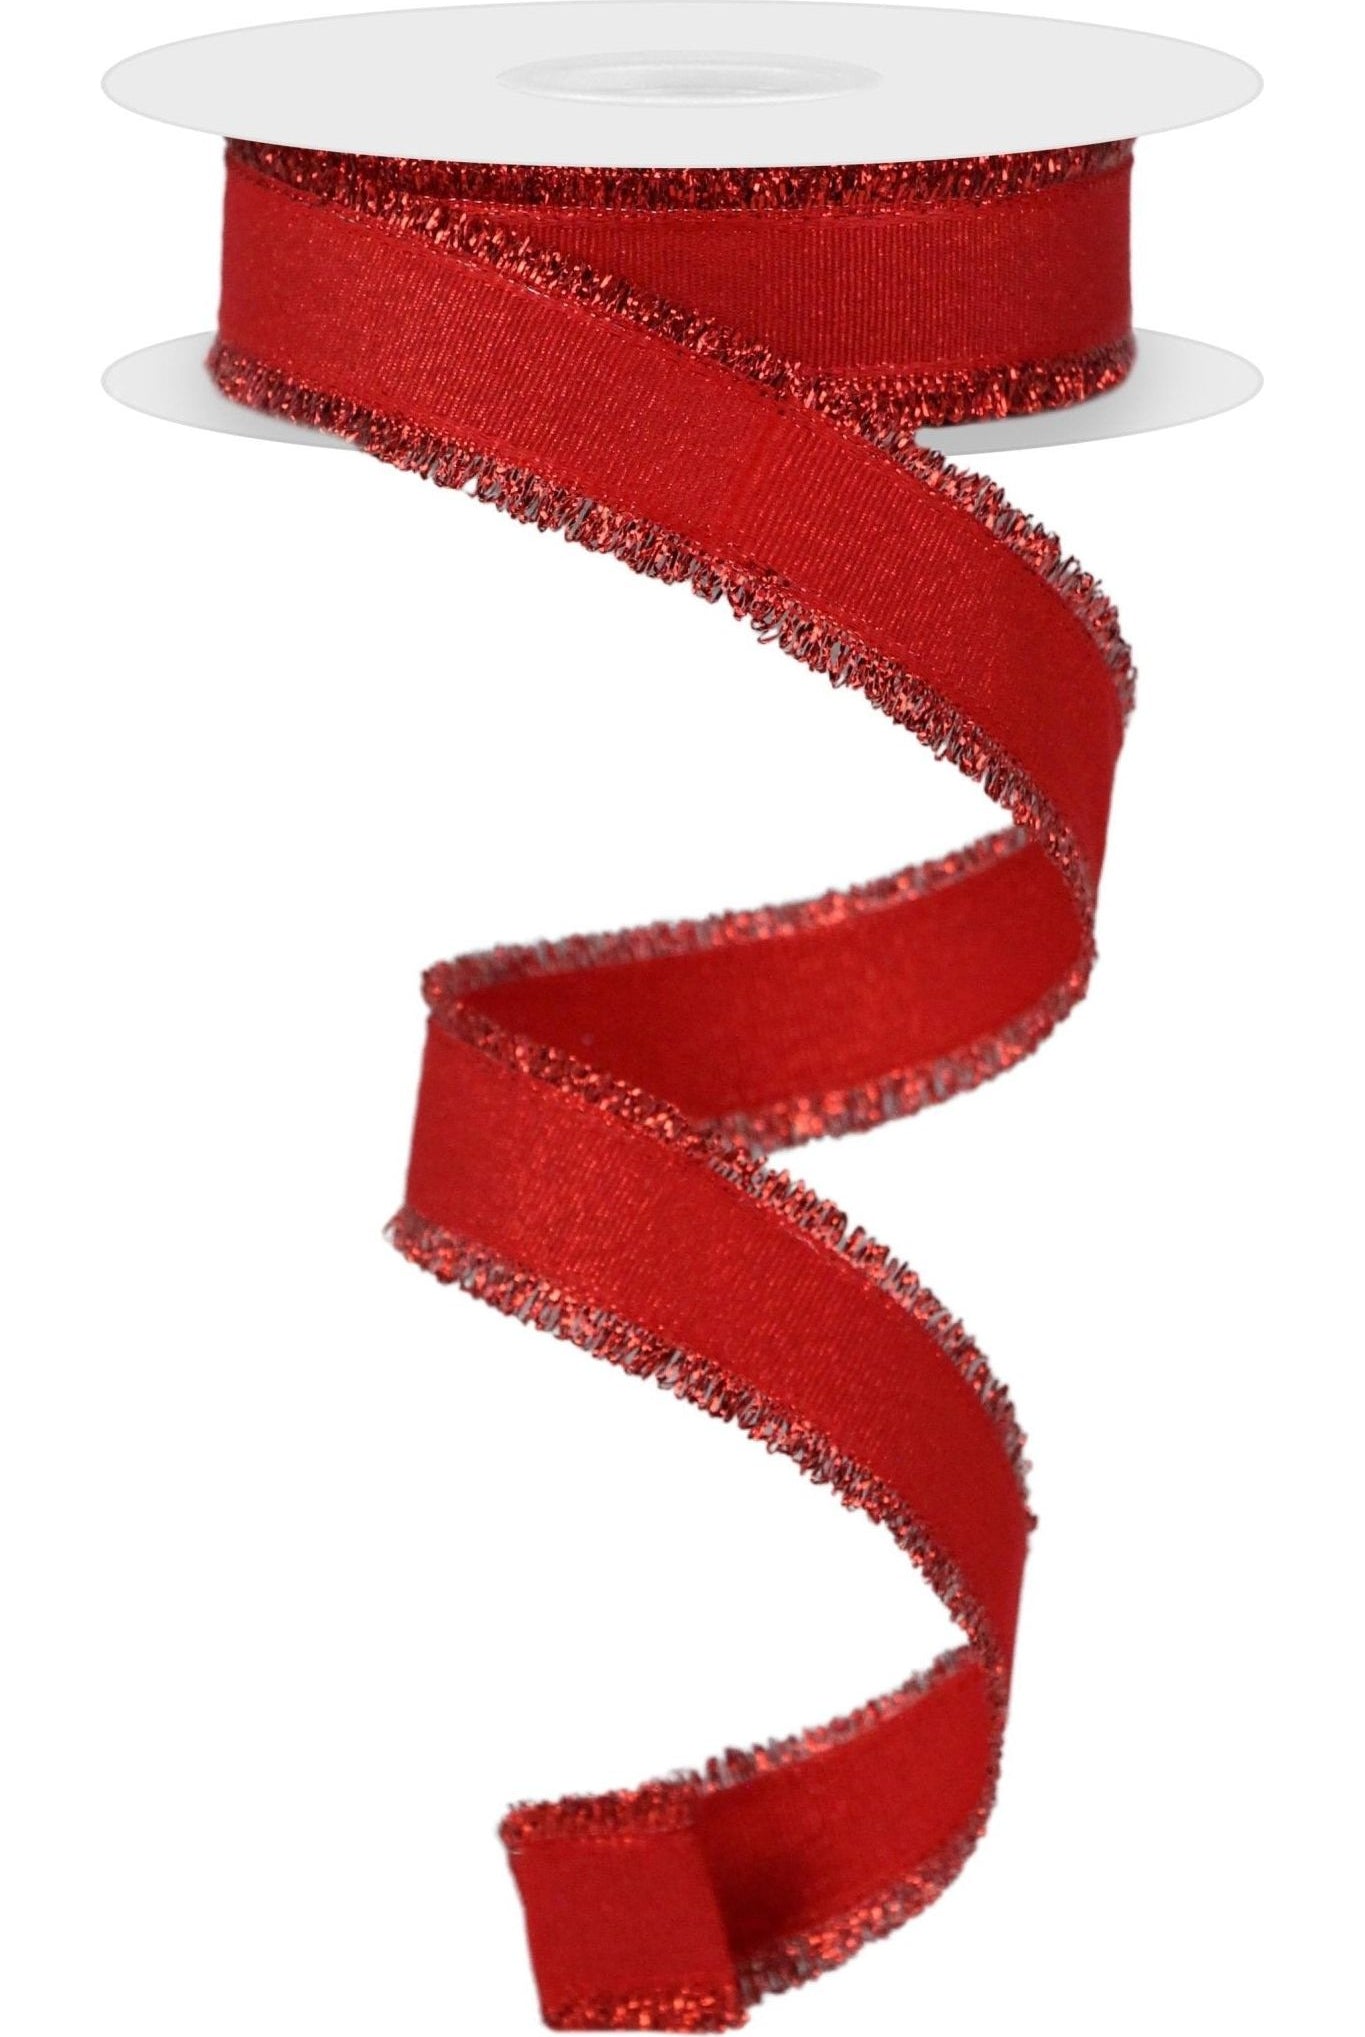 Shop For 7/8" Fuzzy Edge Ribbon: Red (10 Yards) RN587924